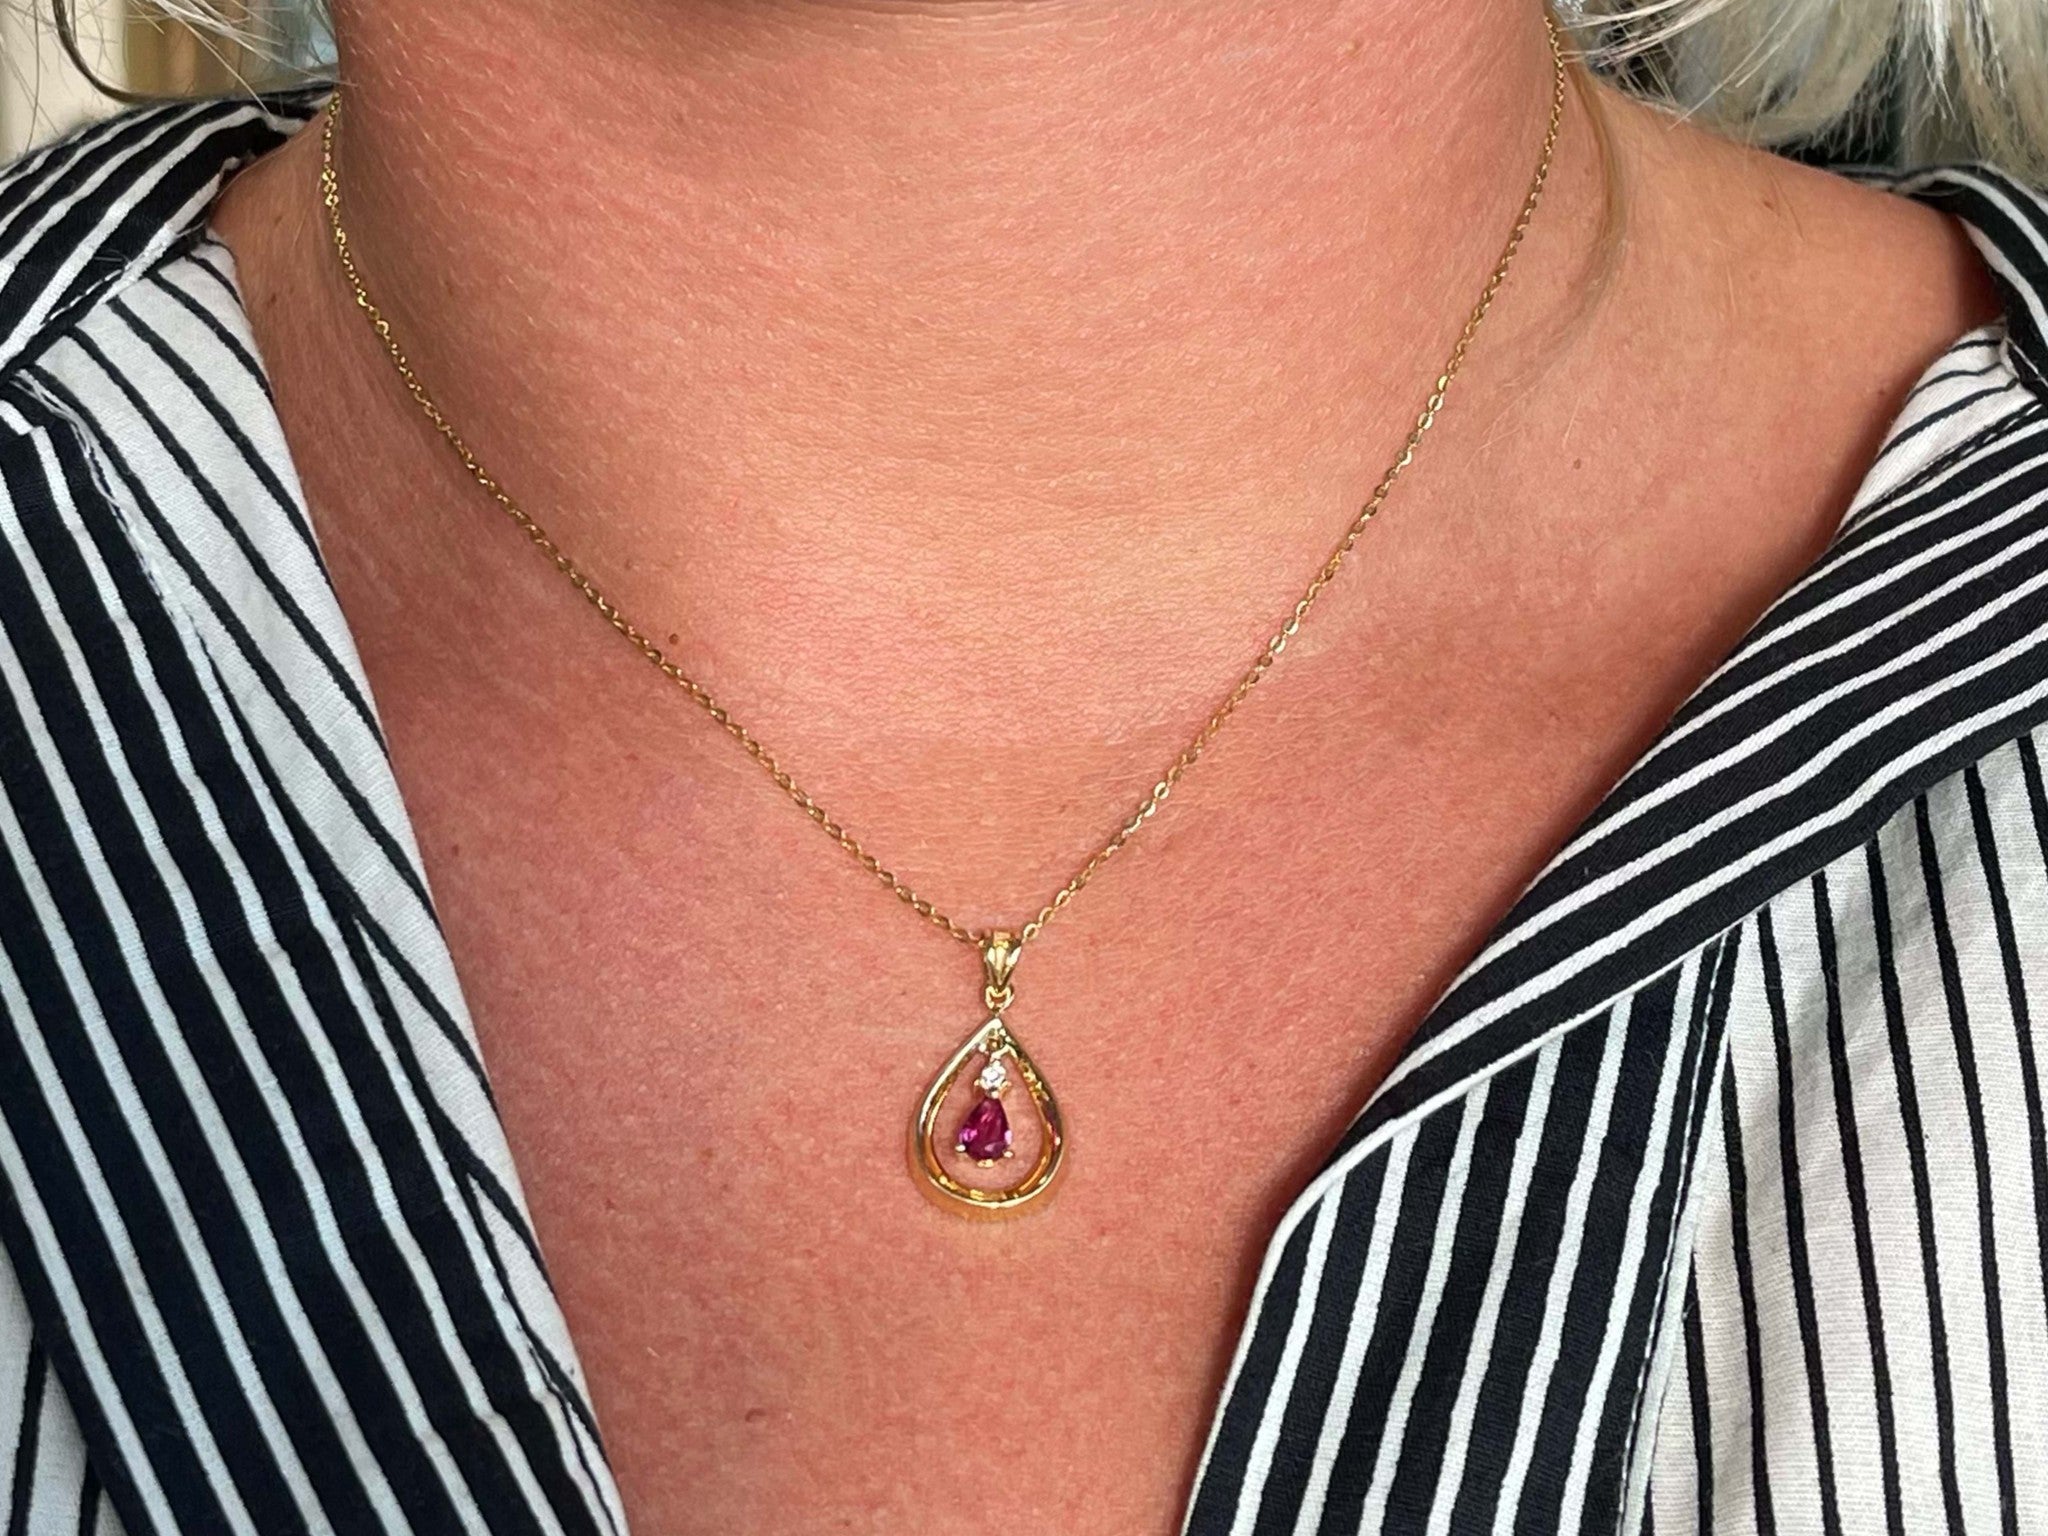 Dangly Burma Ruby Necklace 14k Yellow Gold